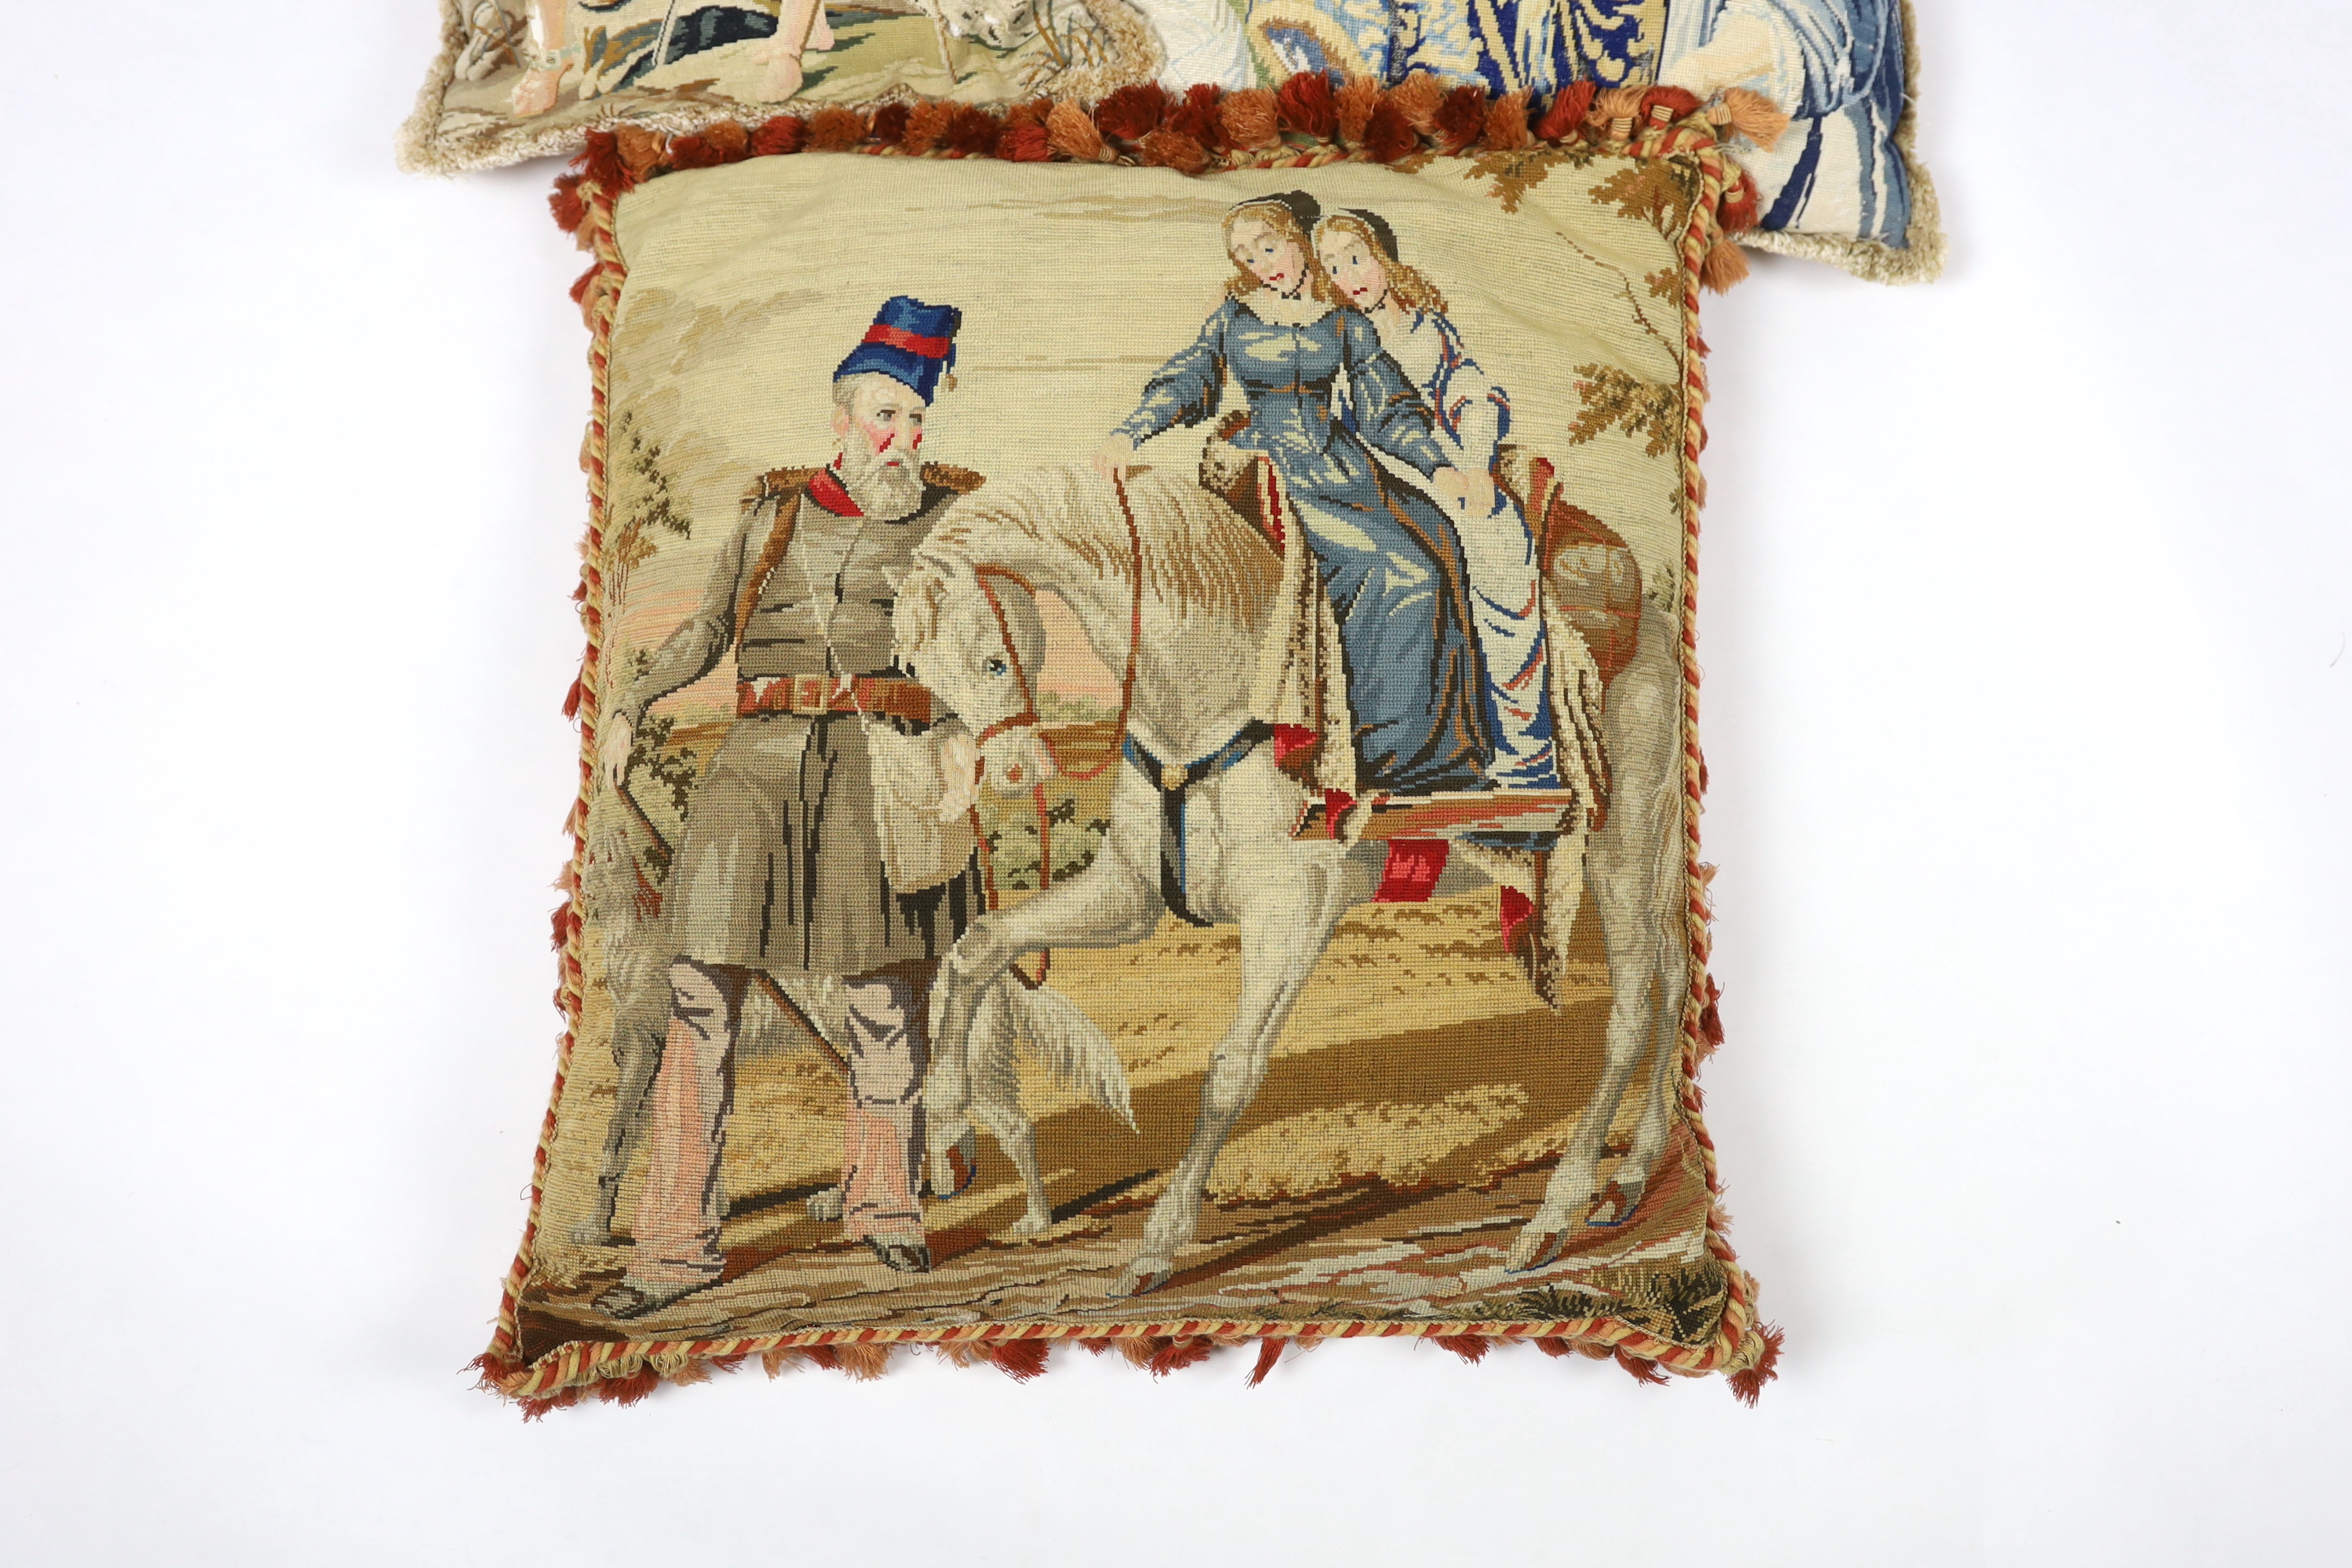 A very large Victorian Berlin wool worked cushion of possibly Queen Victoria's daughters on horseback being led by a gentleman in uniform, the cushion is edged with red tasselling, together with two similar Victorian Ber